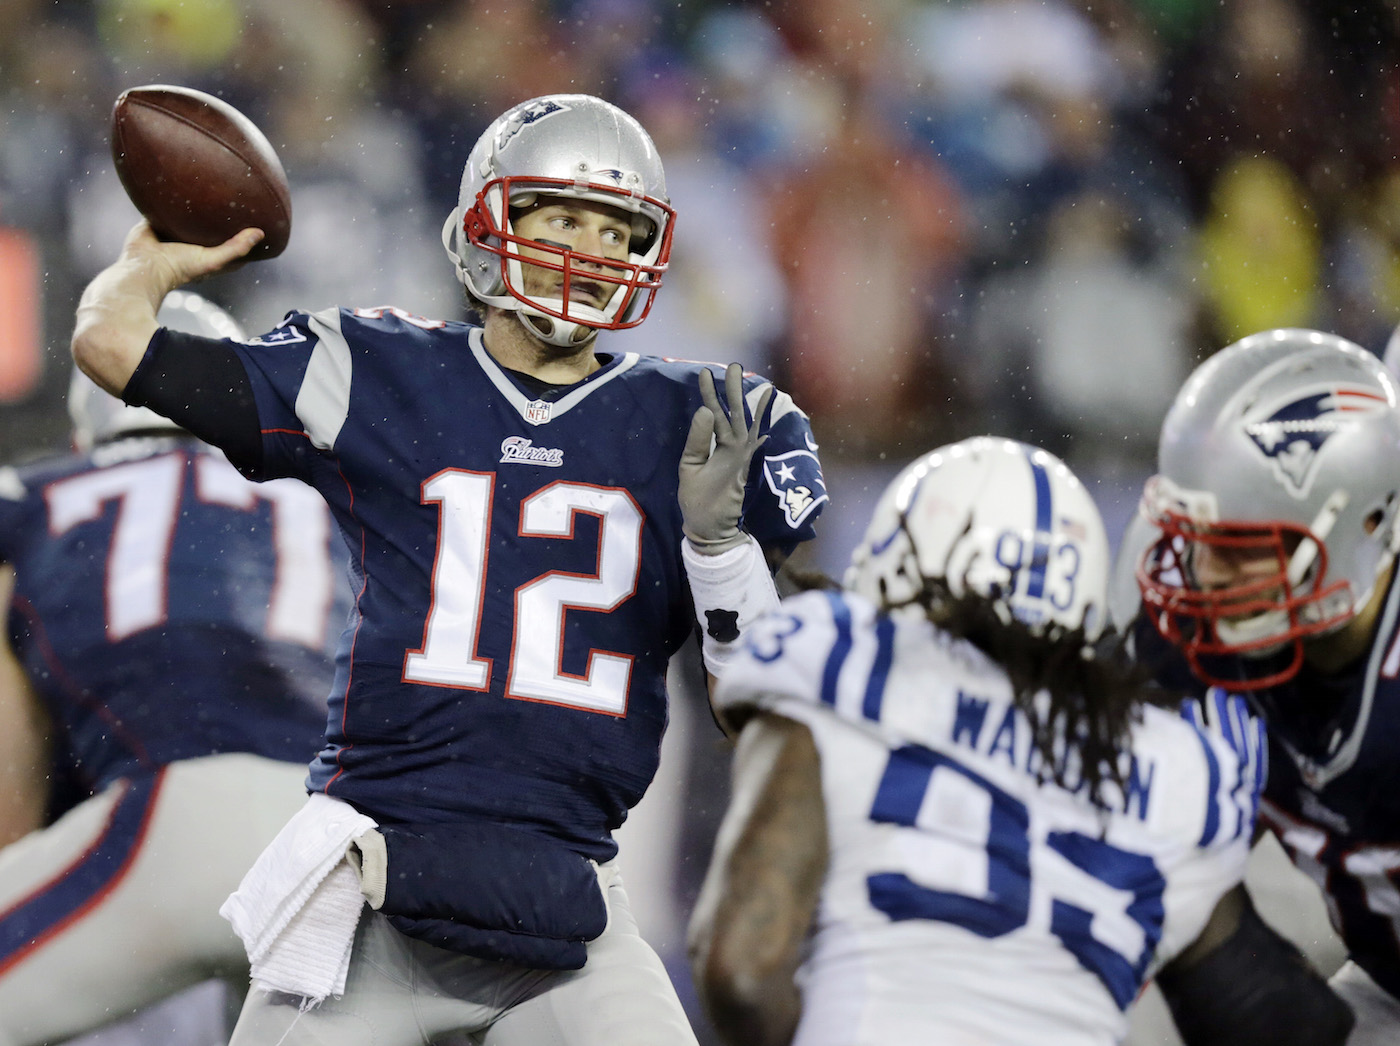 New England Patriots quarterback Tom Brady (12)  passes against the Indianapolis Colts during the second half of the NFL football AFC Championship game Sunday, Jan. 18, 2015, in Foxborough, Mass. (AP Photo/Charles Krupa)